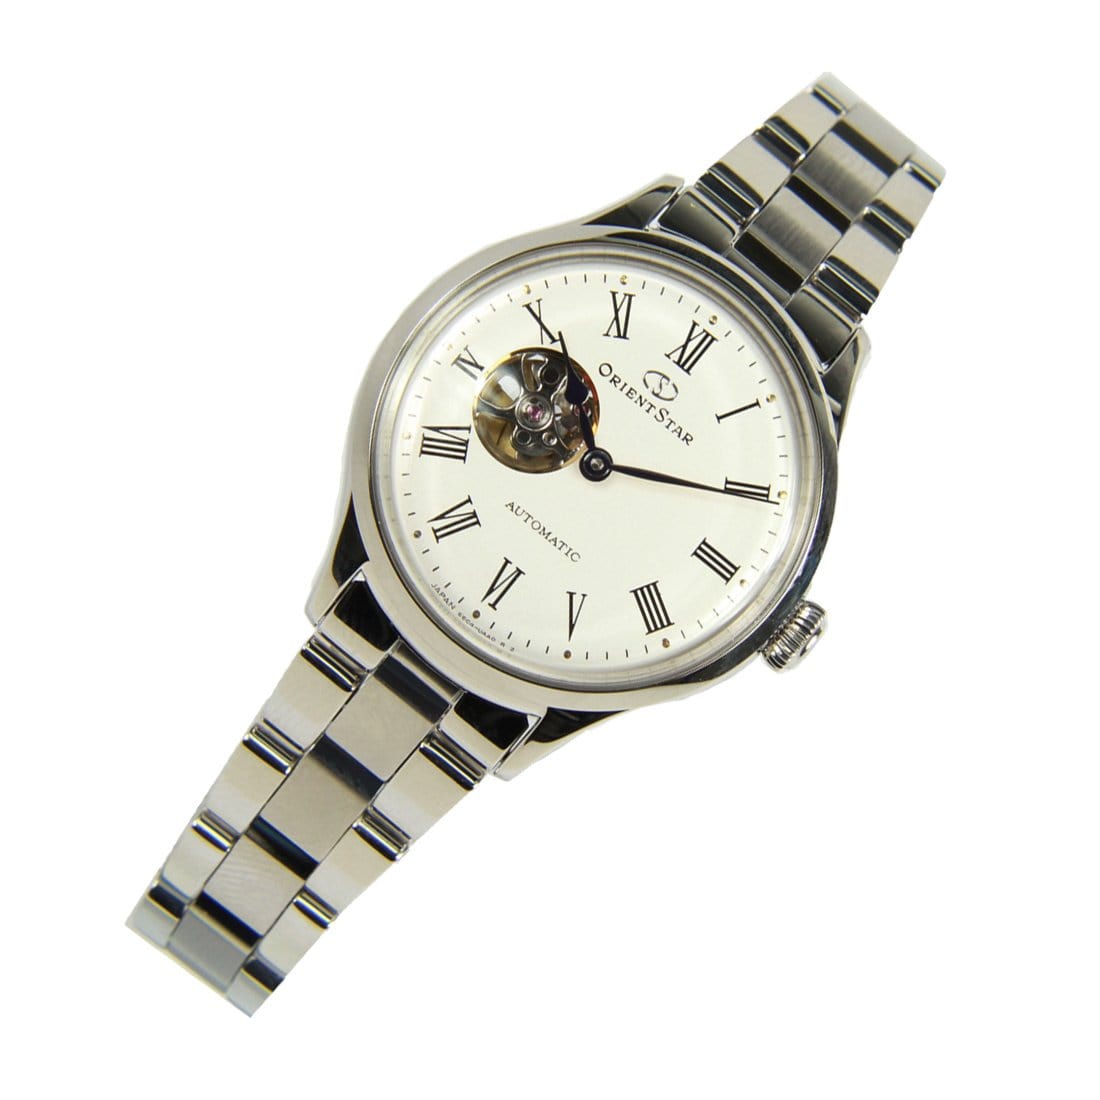 Orient Star Automatic 50M Analog Ladies Watch RE-ND0002S00B